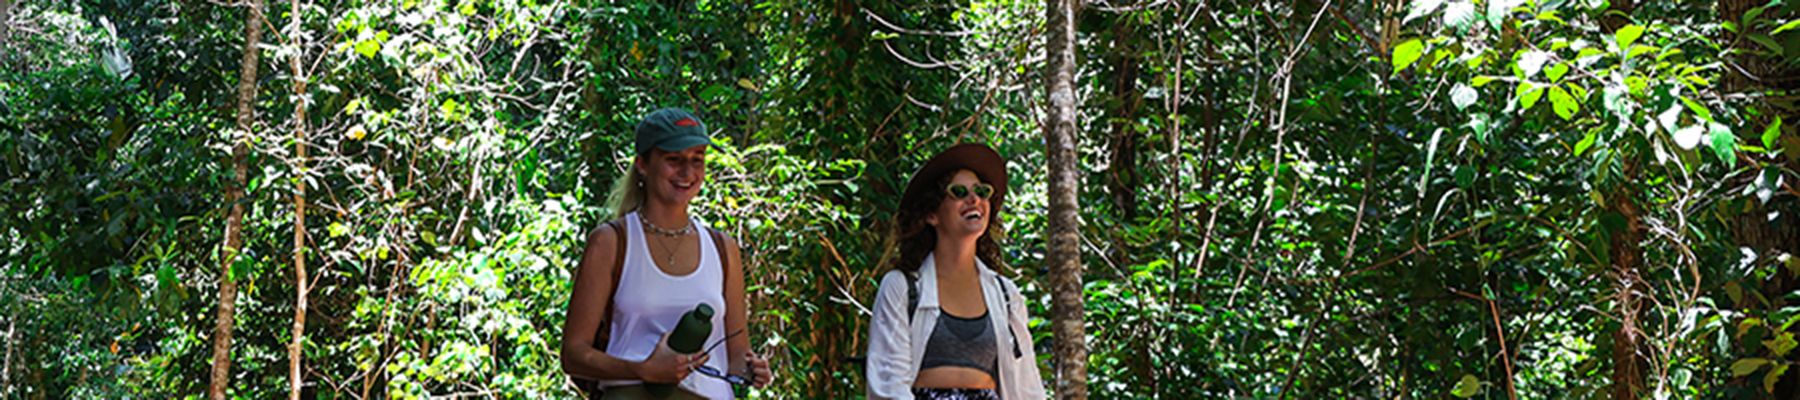 Hiking in Green Island with two woman